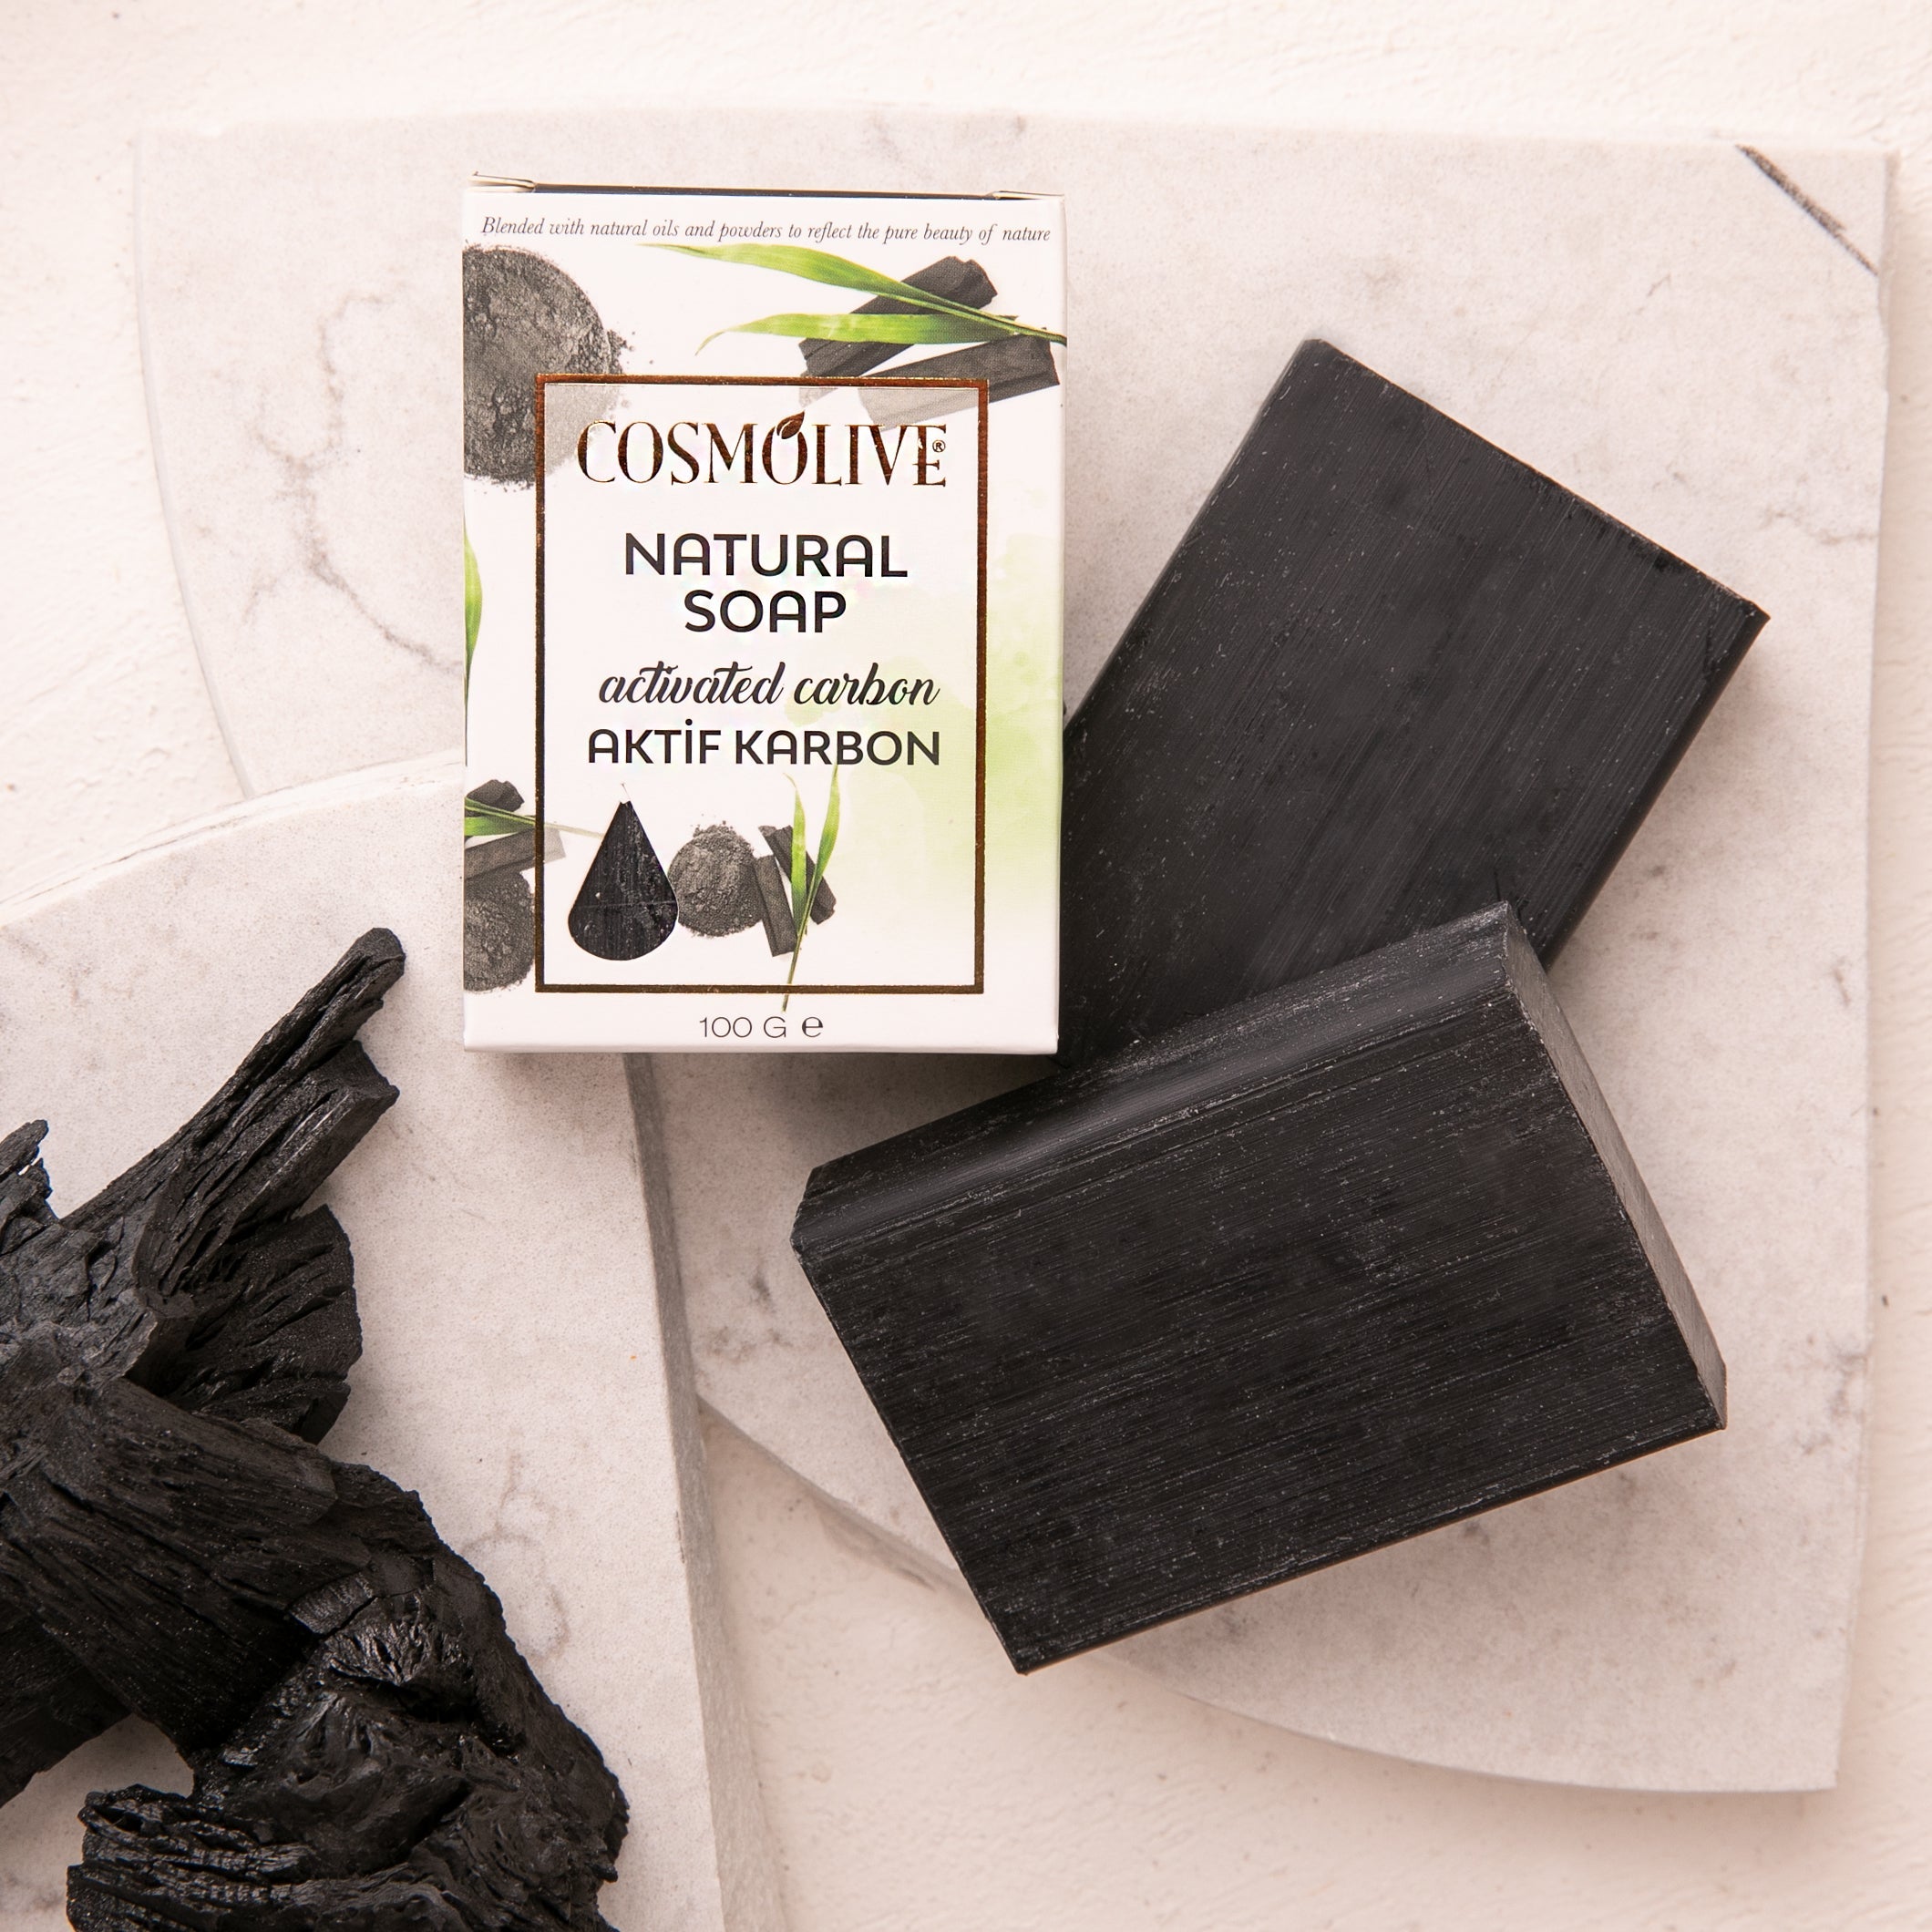 COSMOLIVE ACTIVATED CARBON NATURAL SOAP 100 g Detox Effect / Natural Life